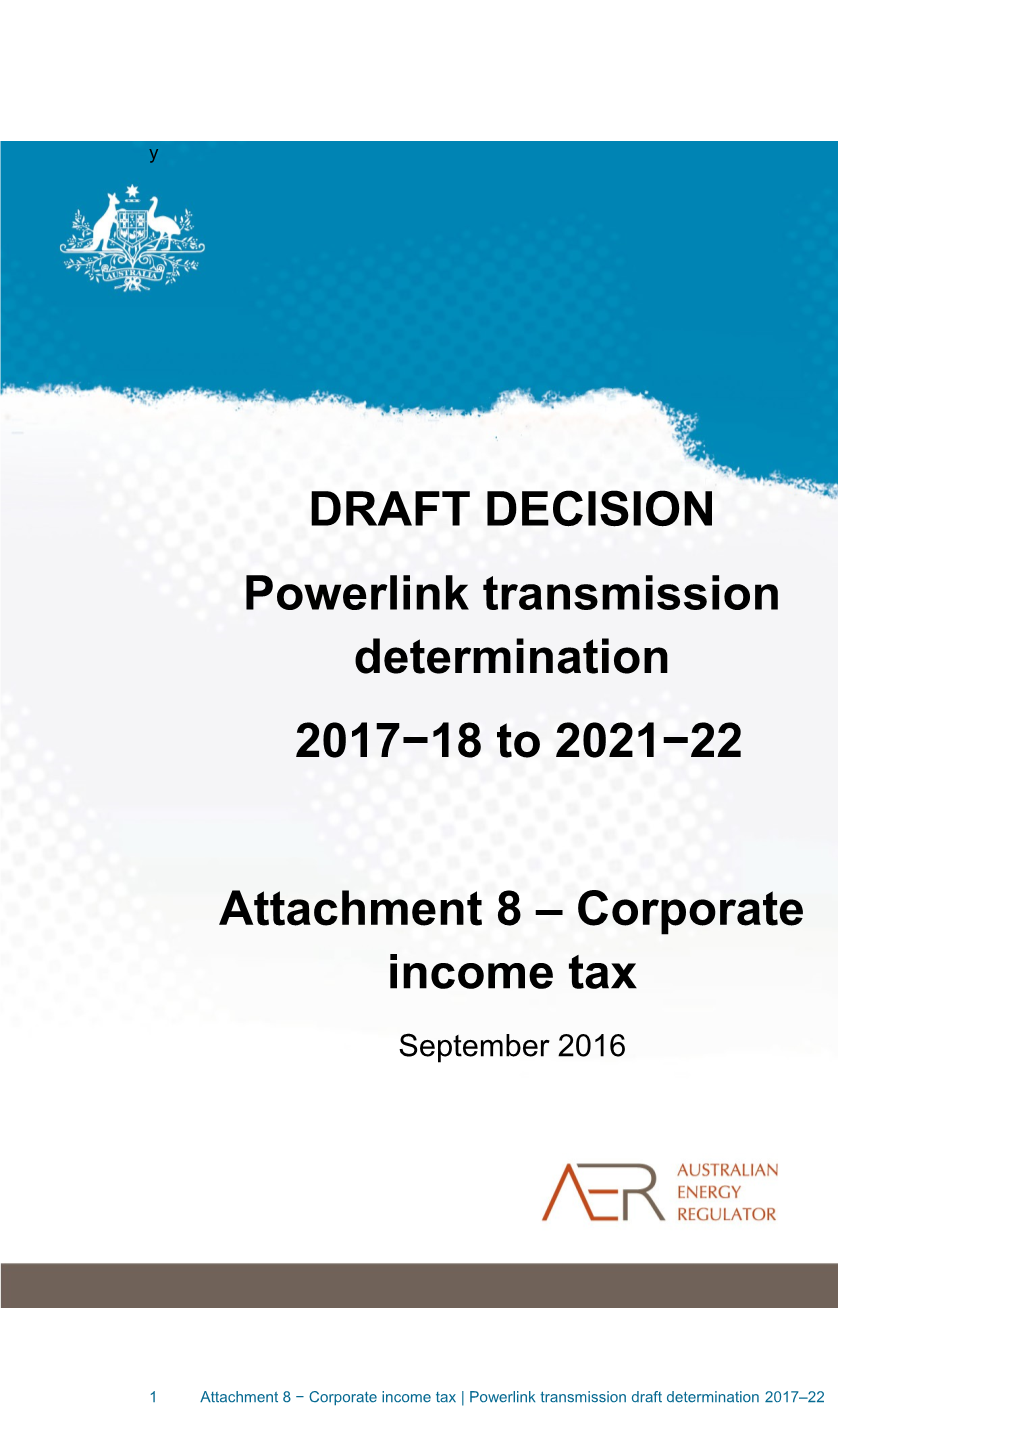 AER Draft Decision - Powerlink - Attachment 8 - Corporate Income Tax